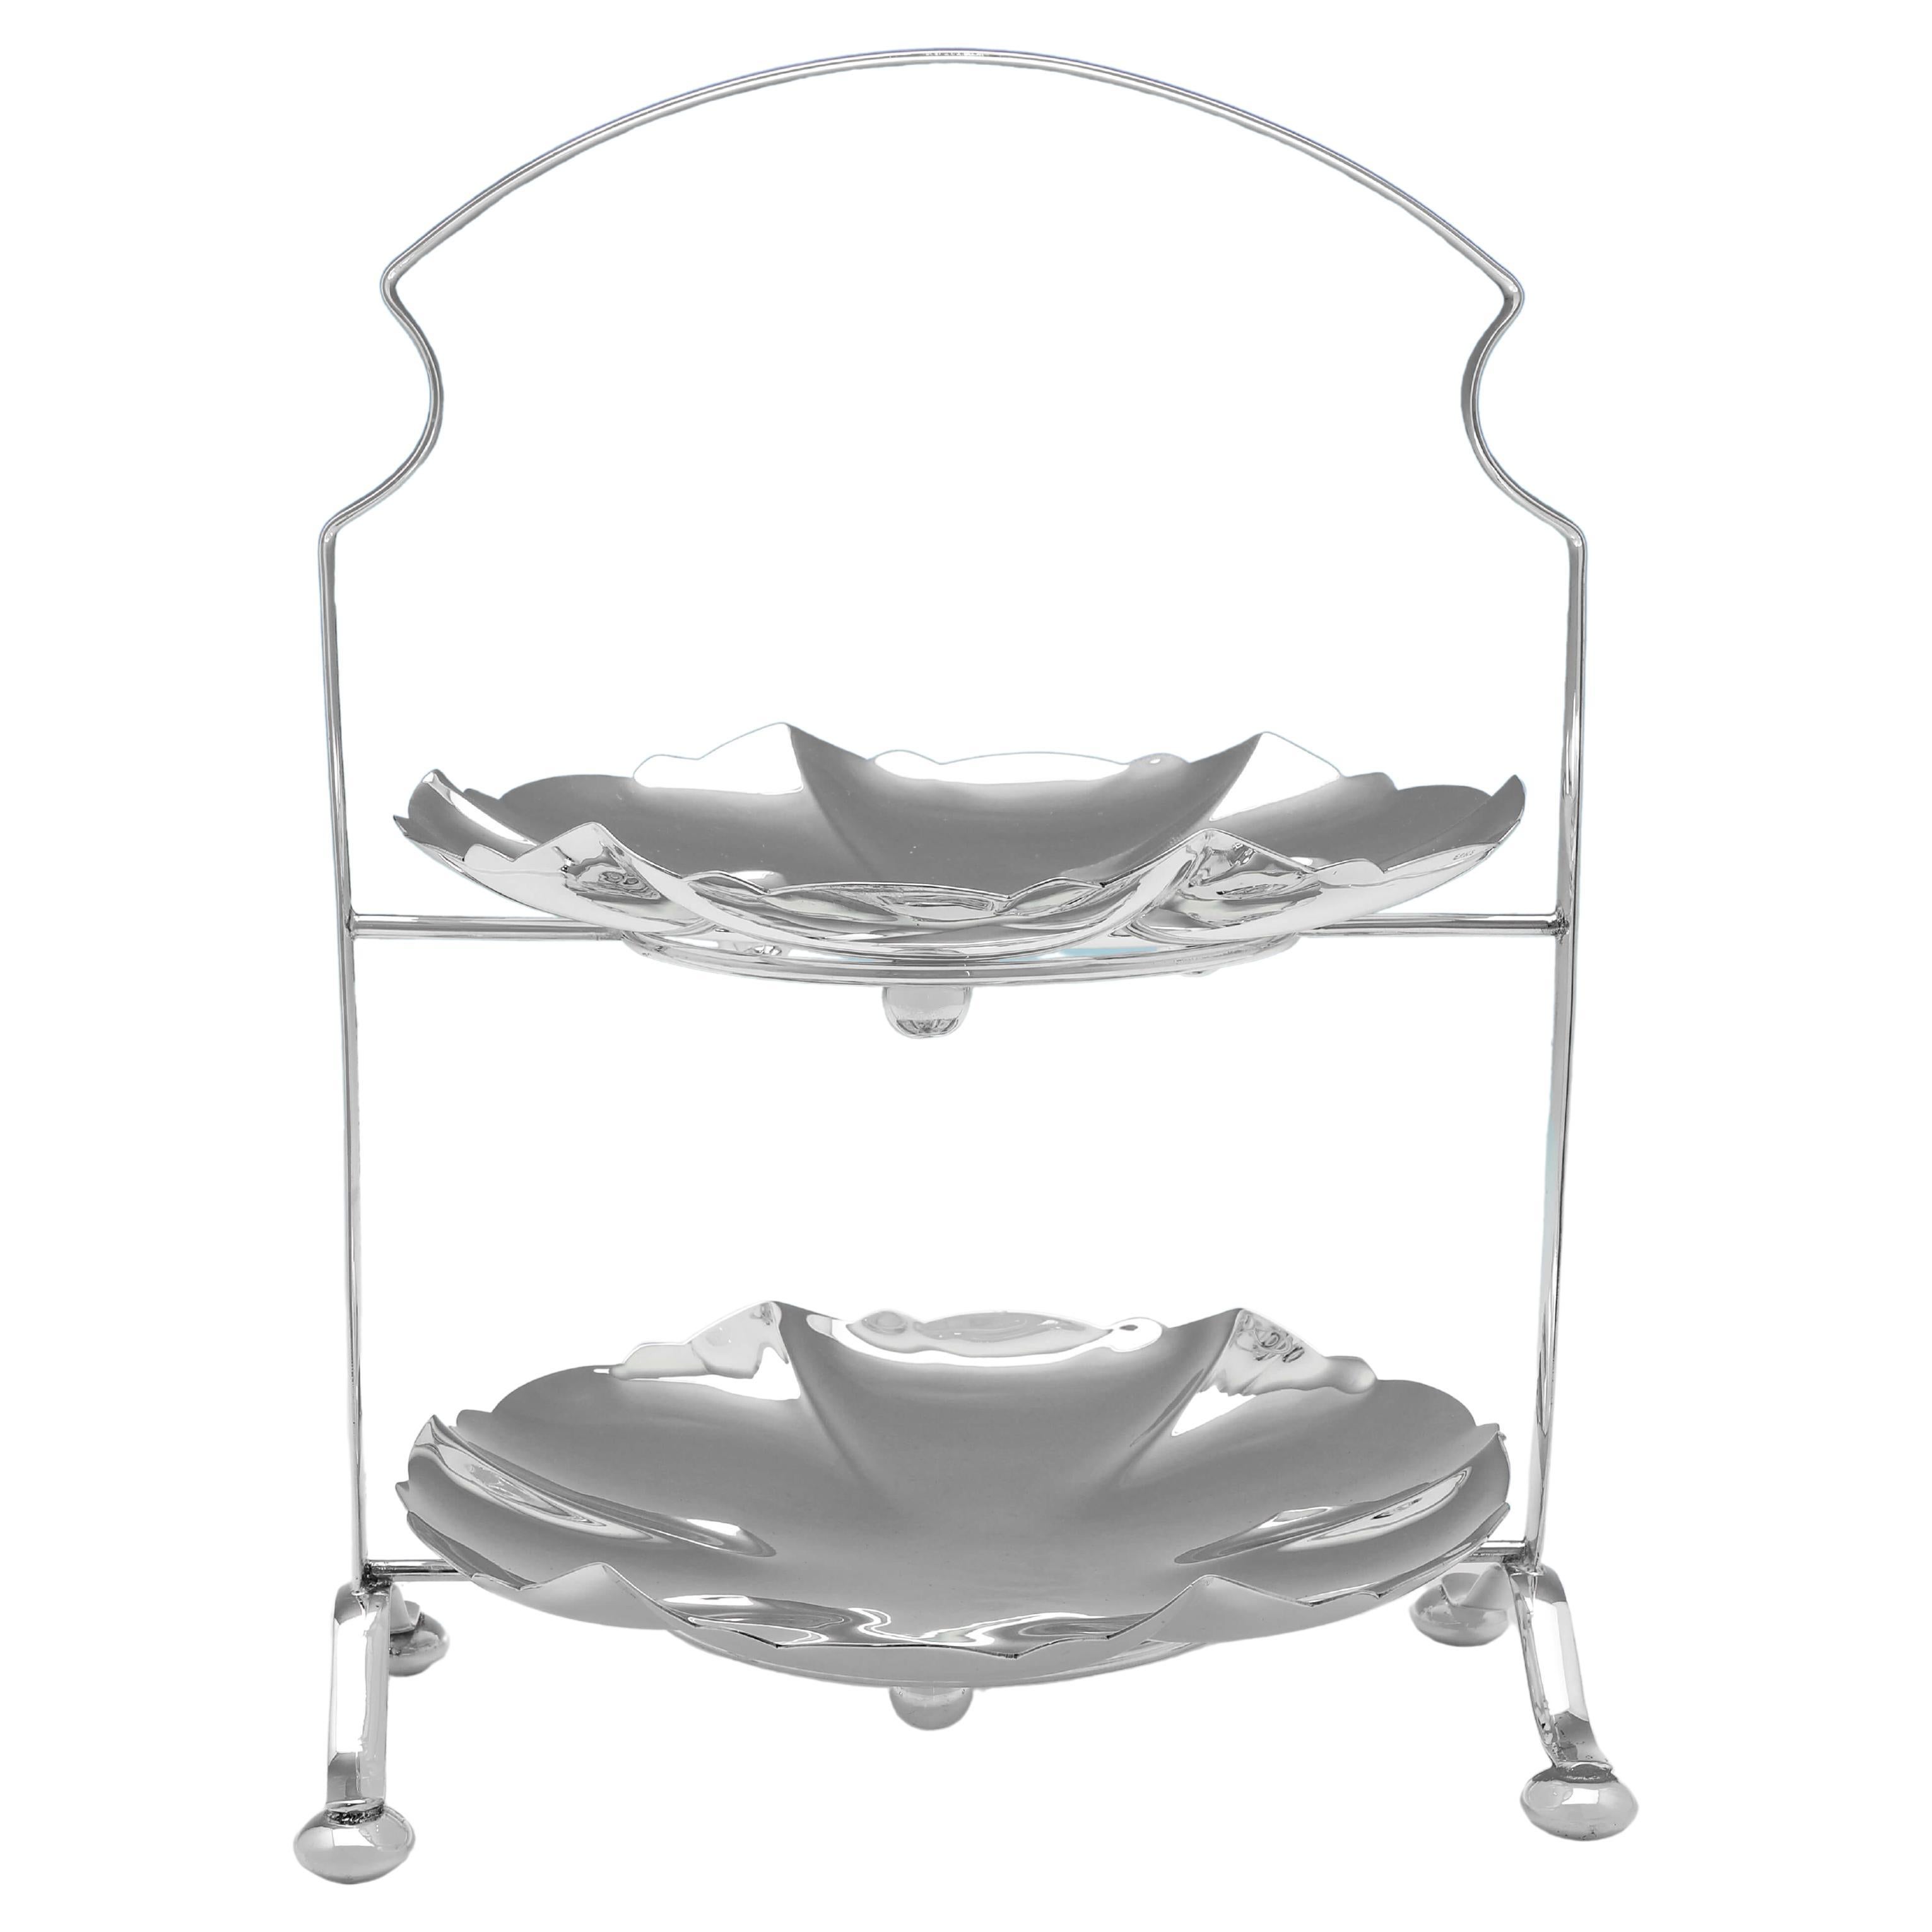 Afternoon Tea, Silver Plated Cake Stand, Made circa 1920 